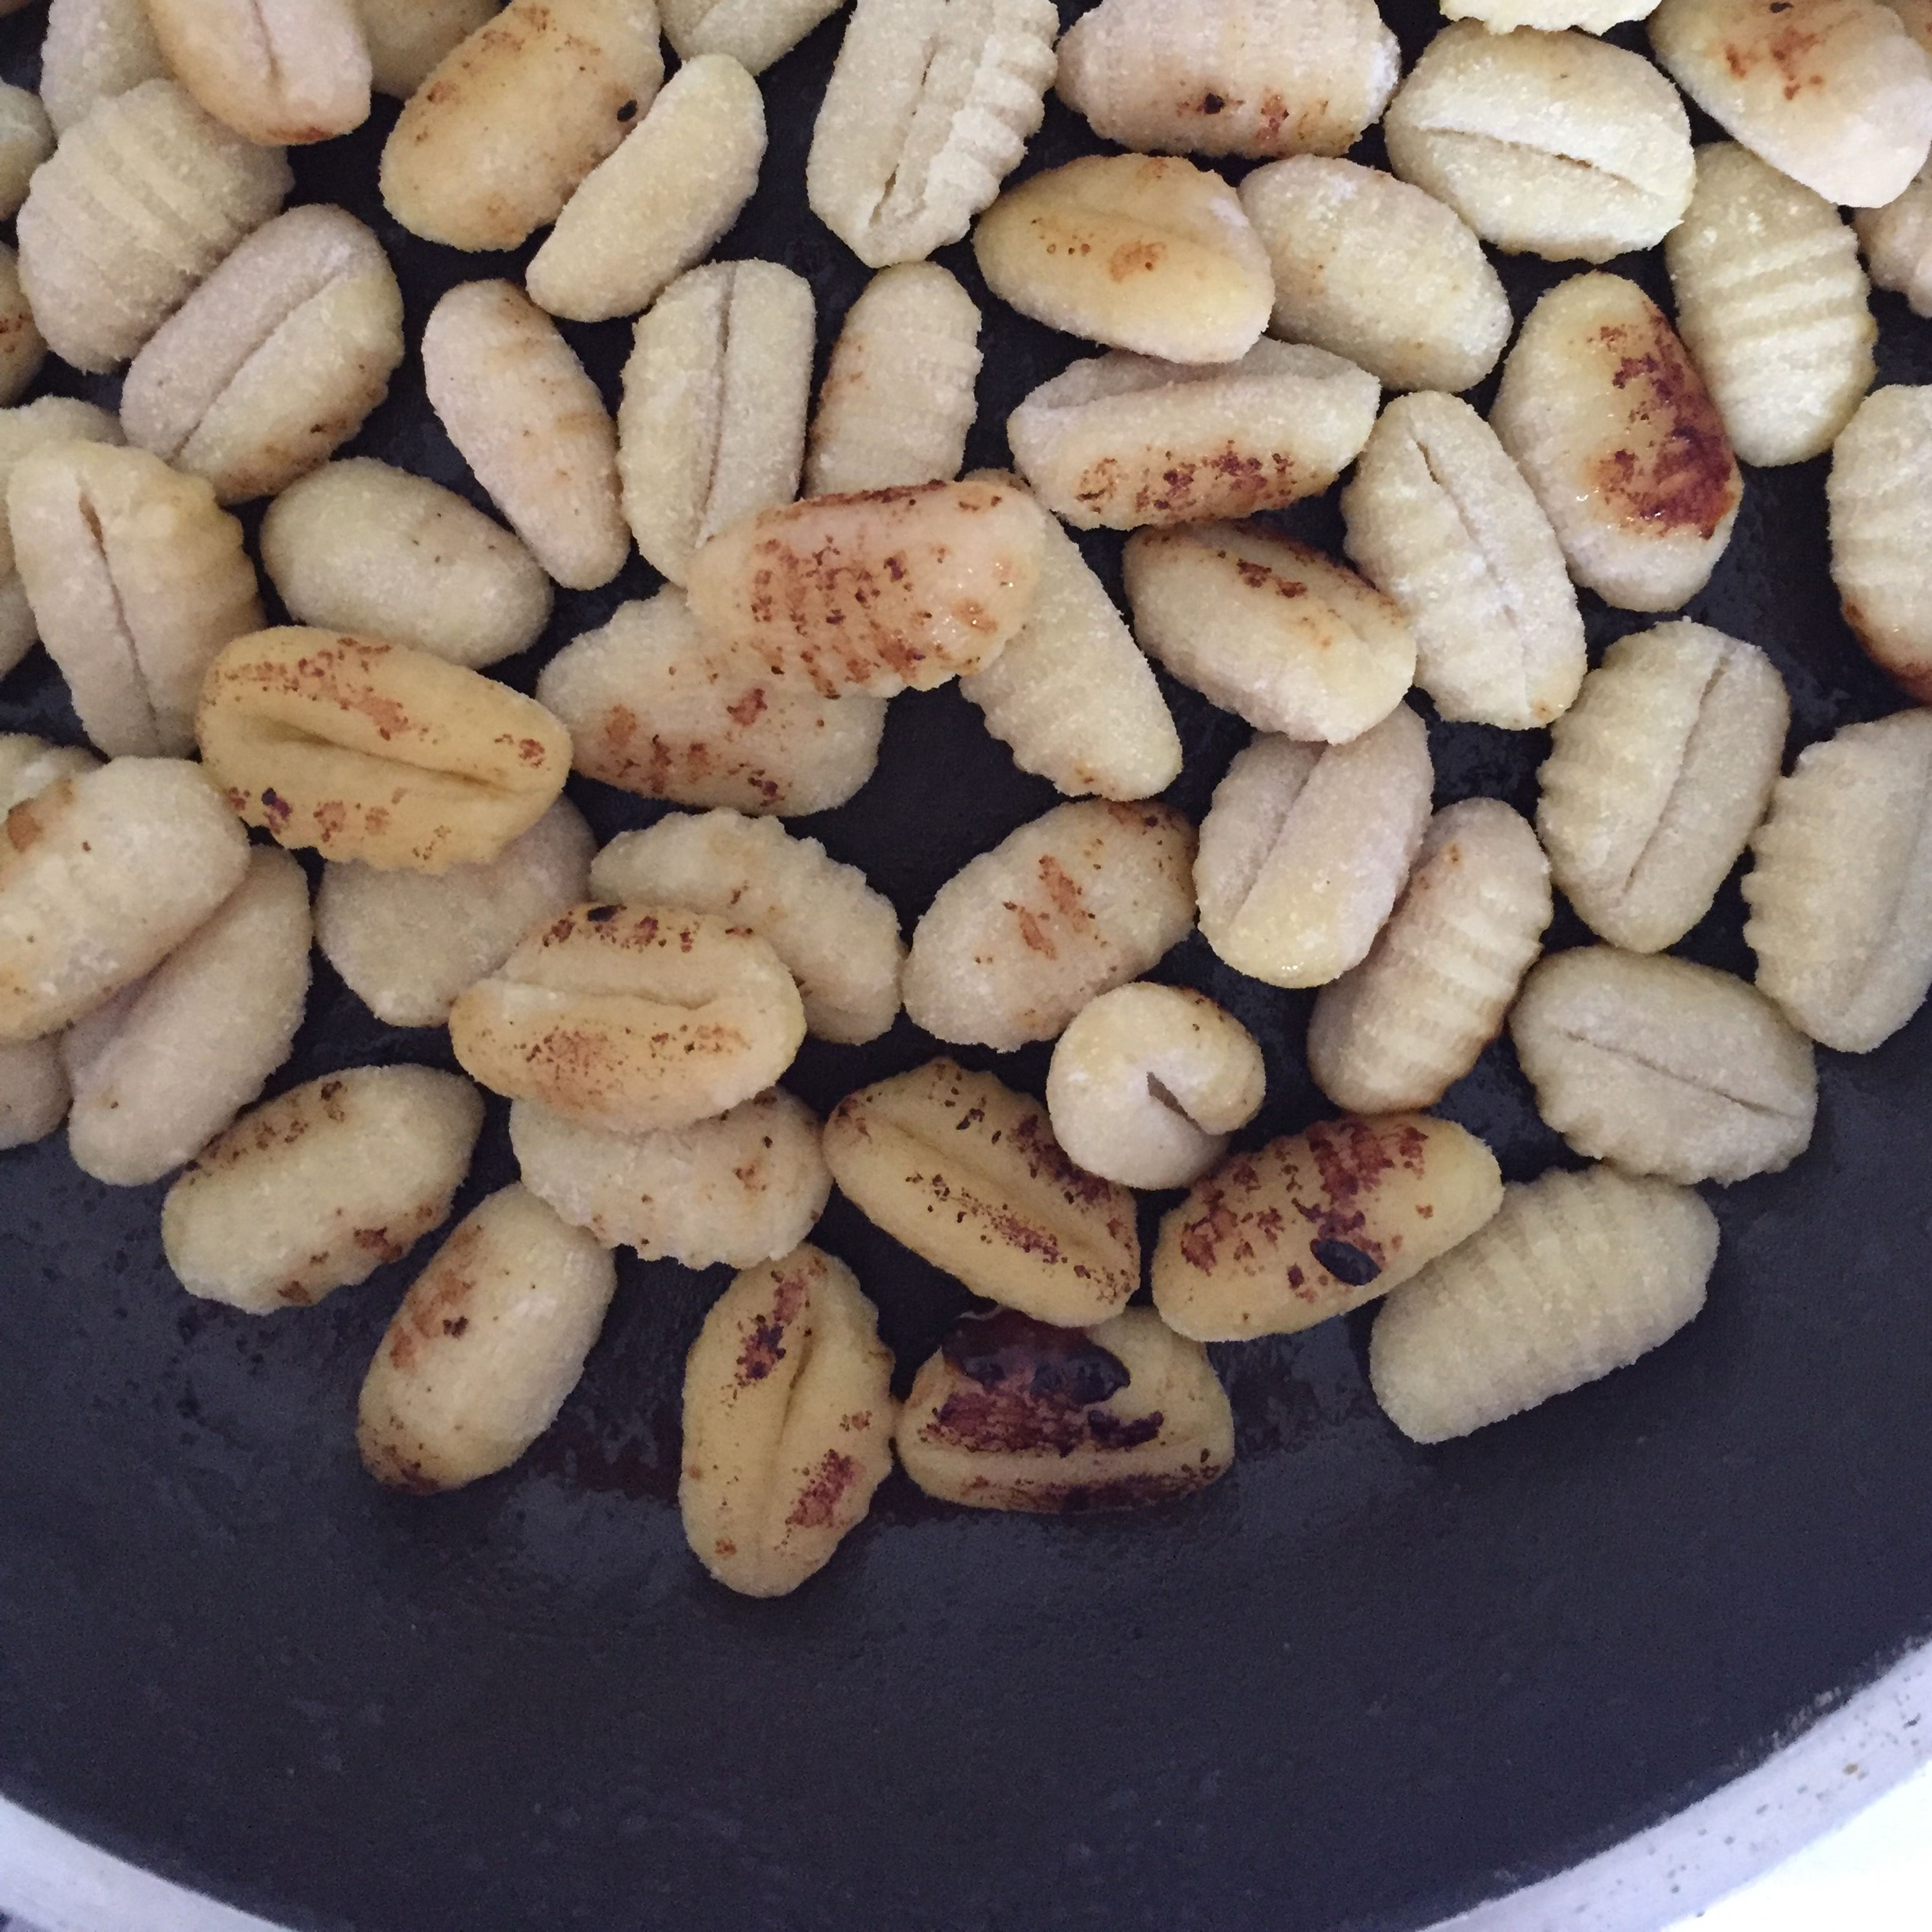 Fry gnocchi in the same frying pan with the remaining oil until they are golden brown.